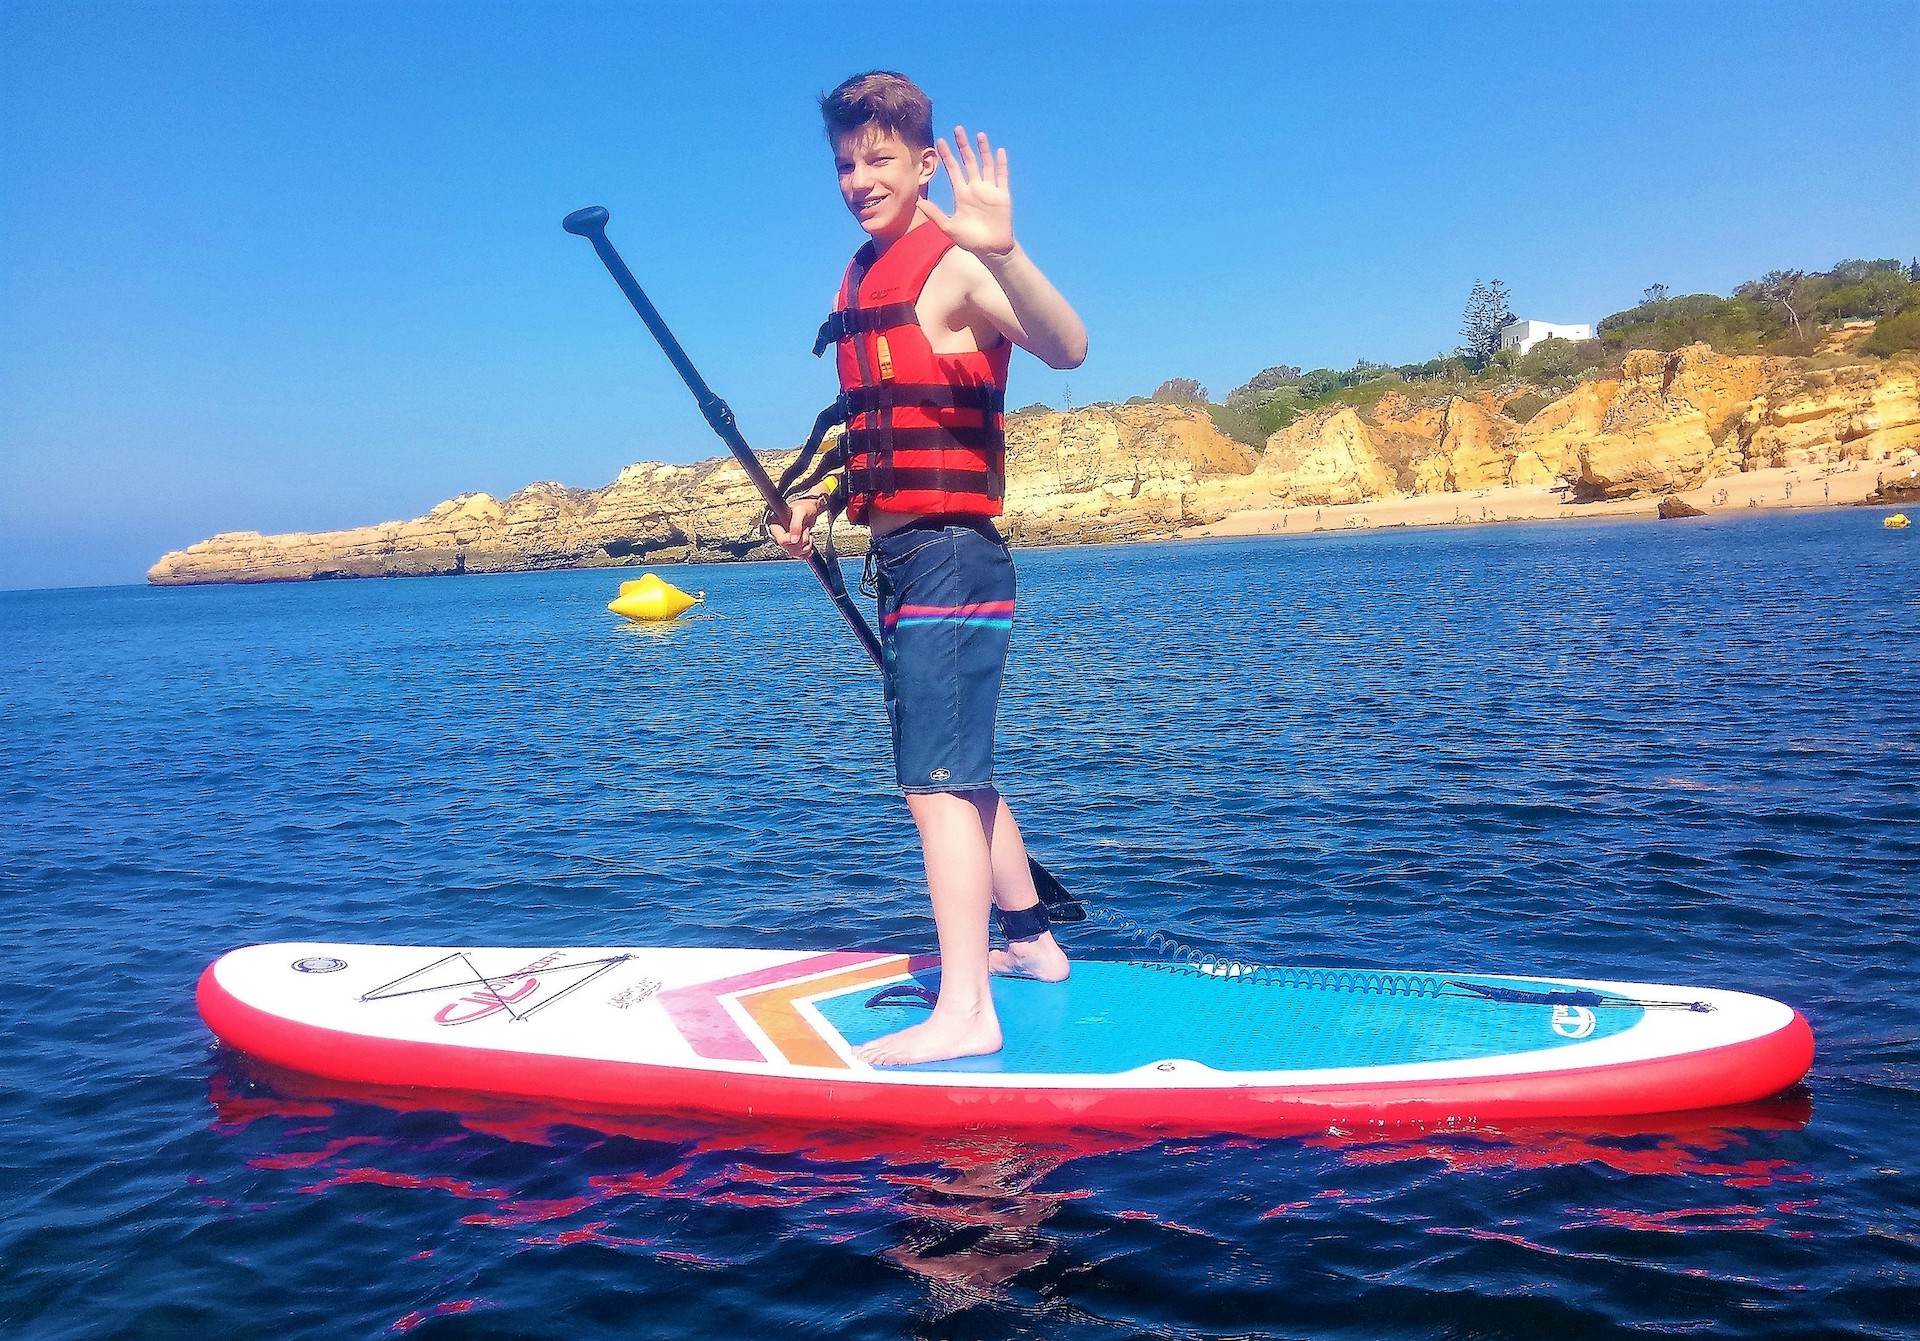 SUP in Albufeira is a lot of fun